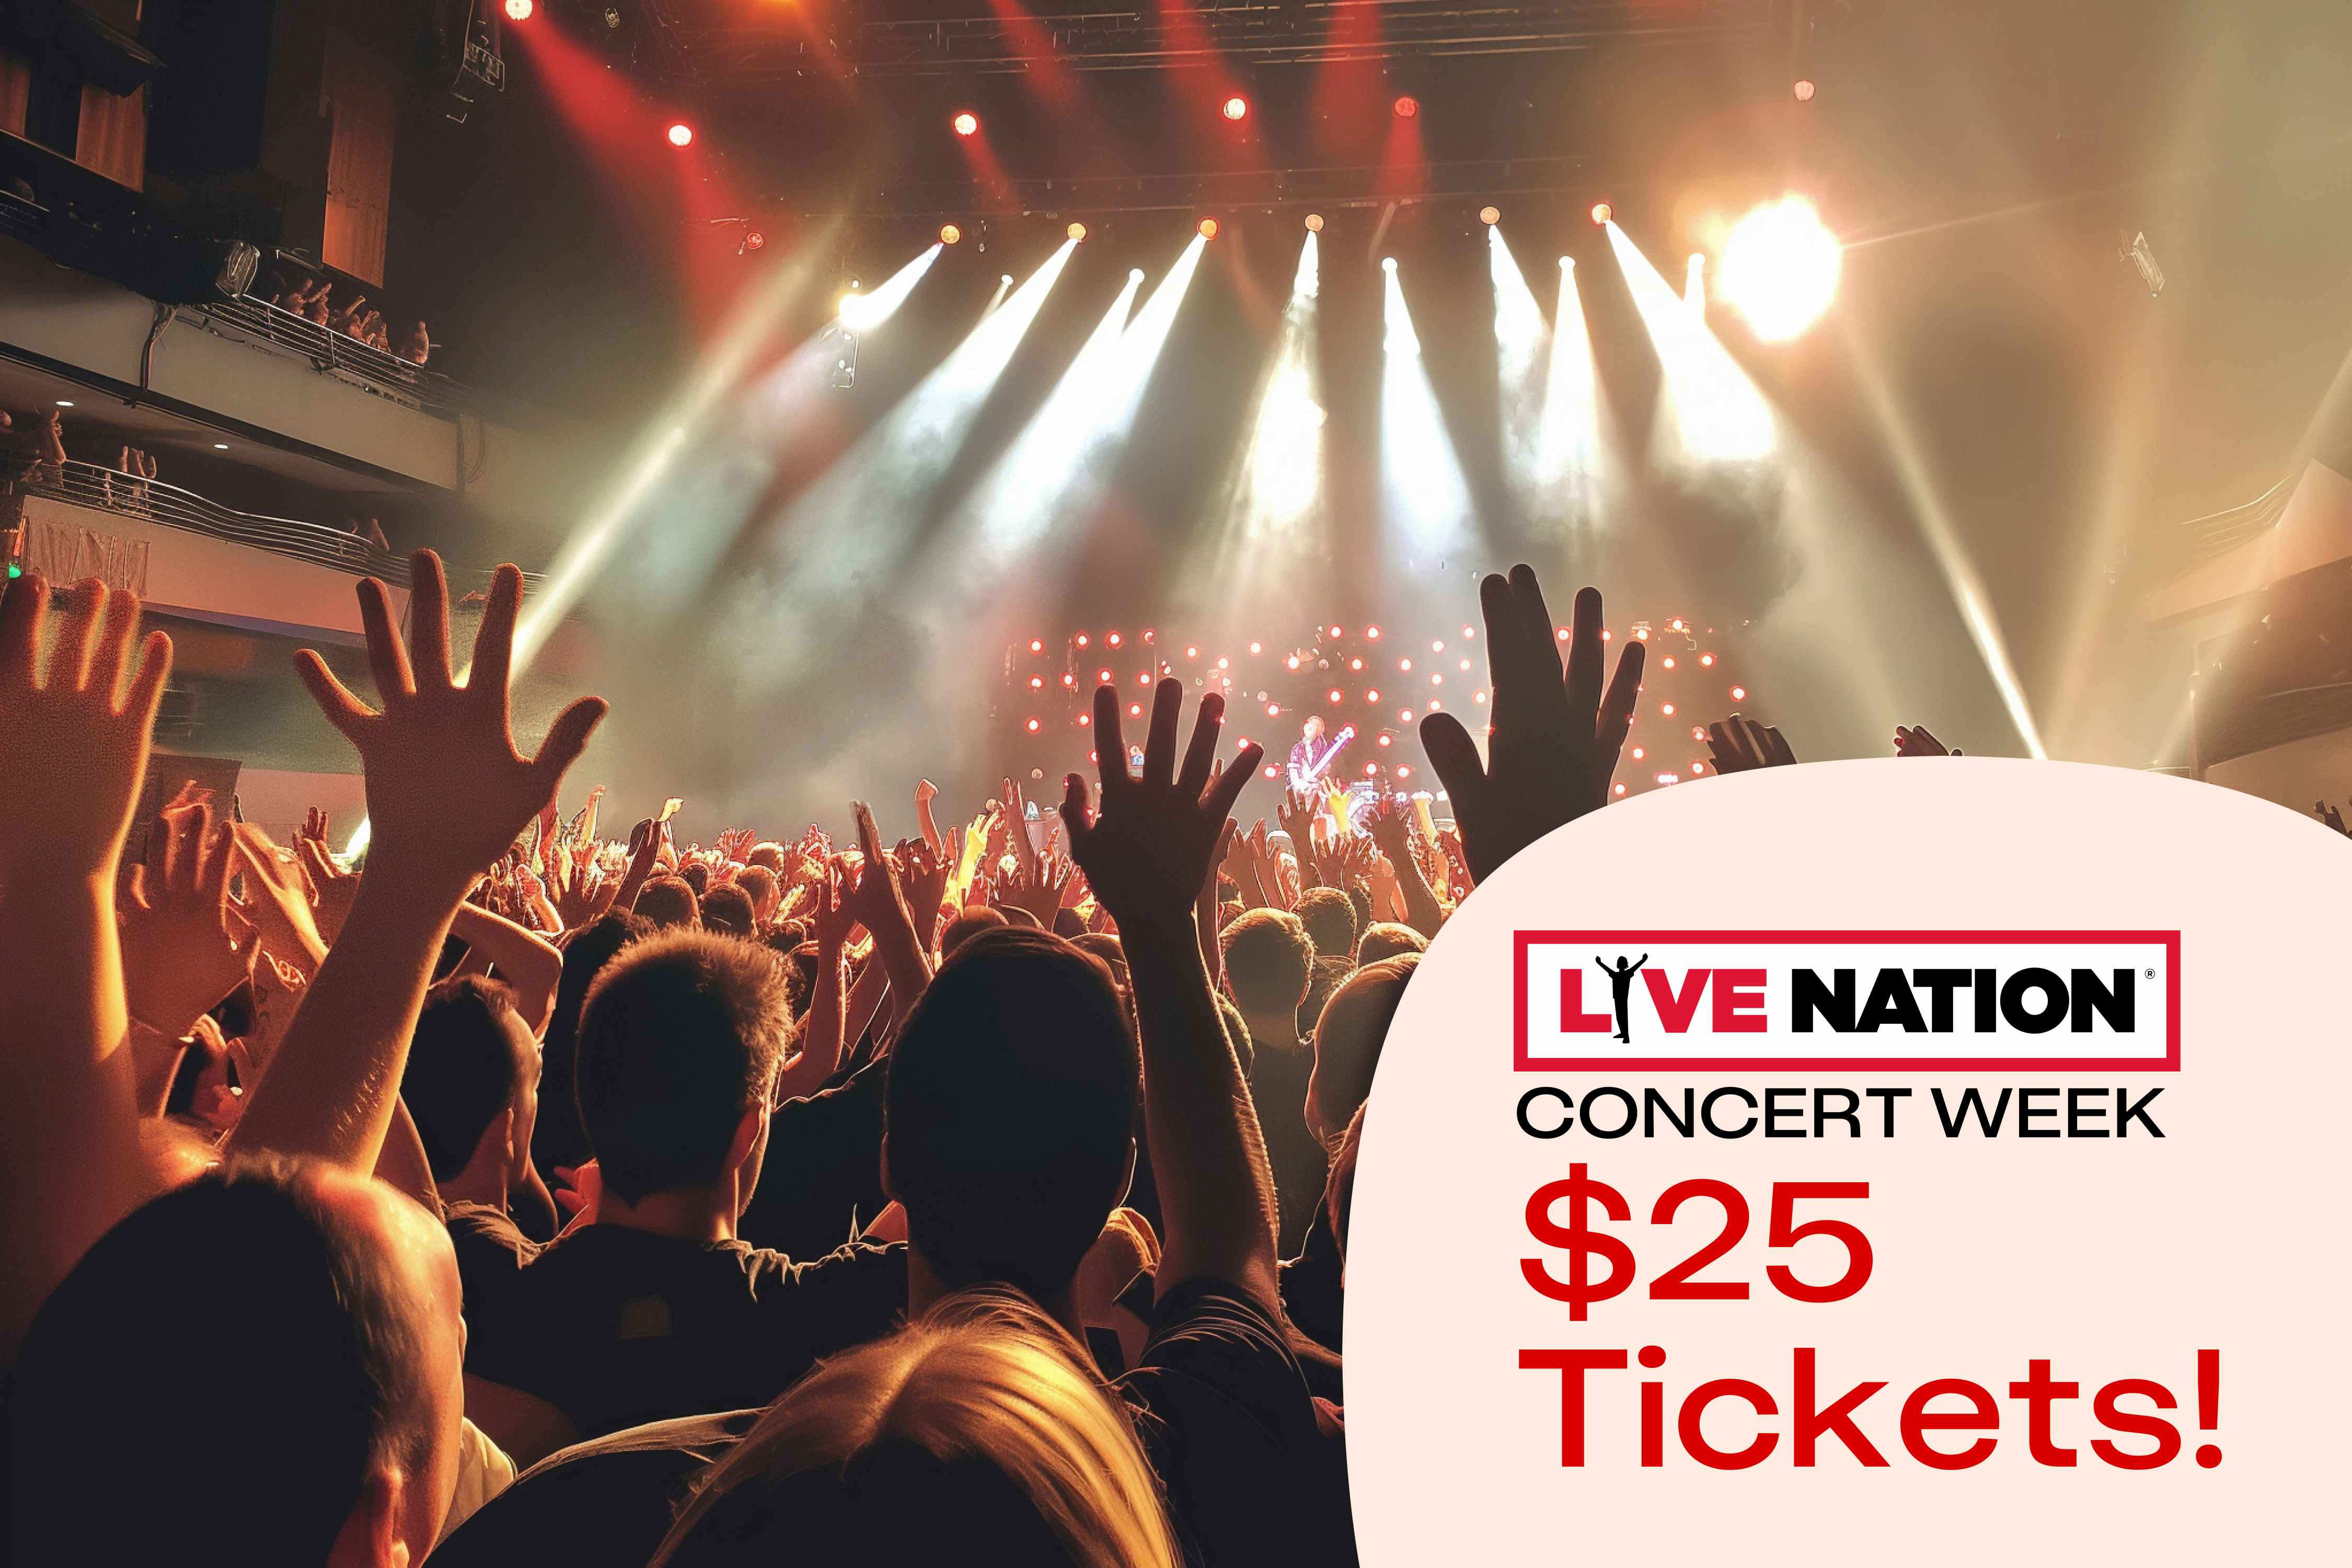 Grab $25 Live Nation Concert Week Tickets With Groupon Deal!